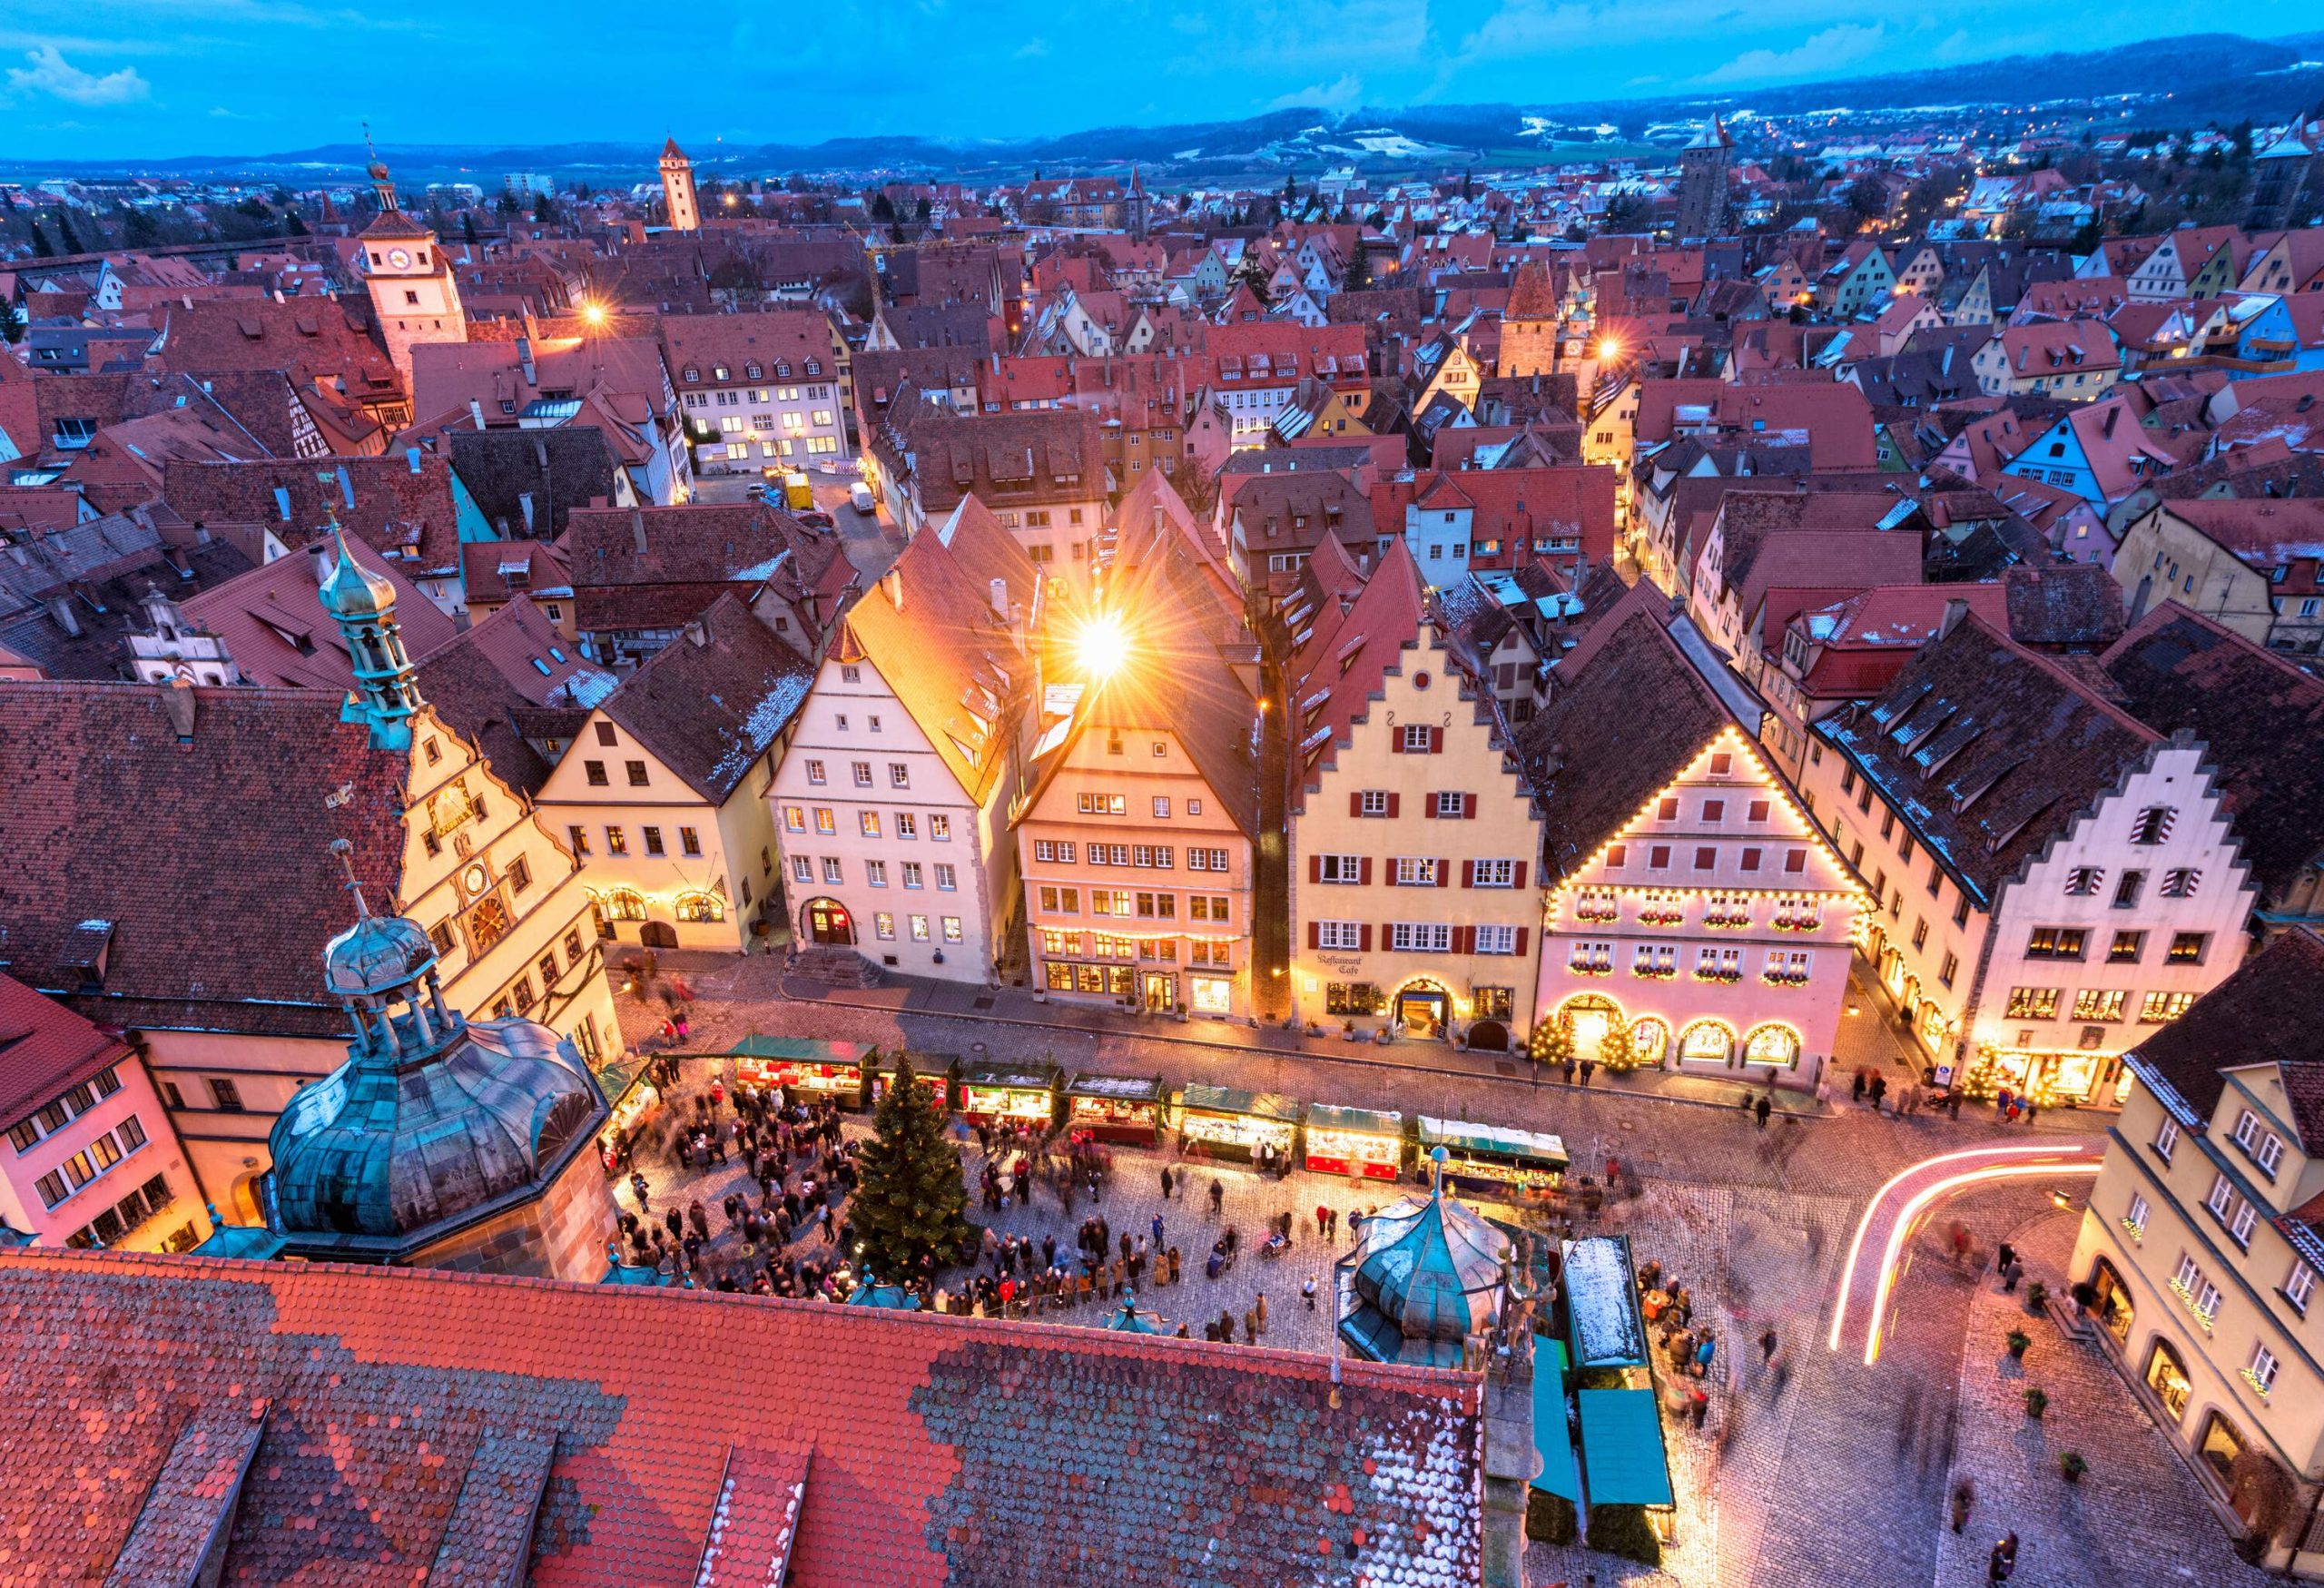 A city dominated by two towers protruding above the roofs of numerous houses alongside a Christmas market.